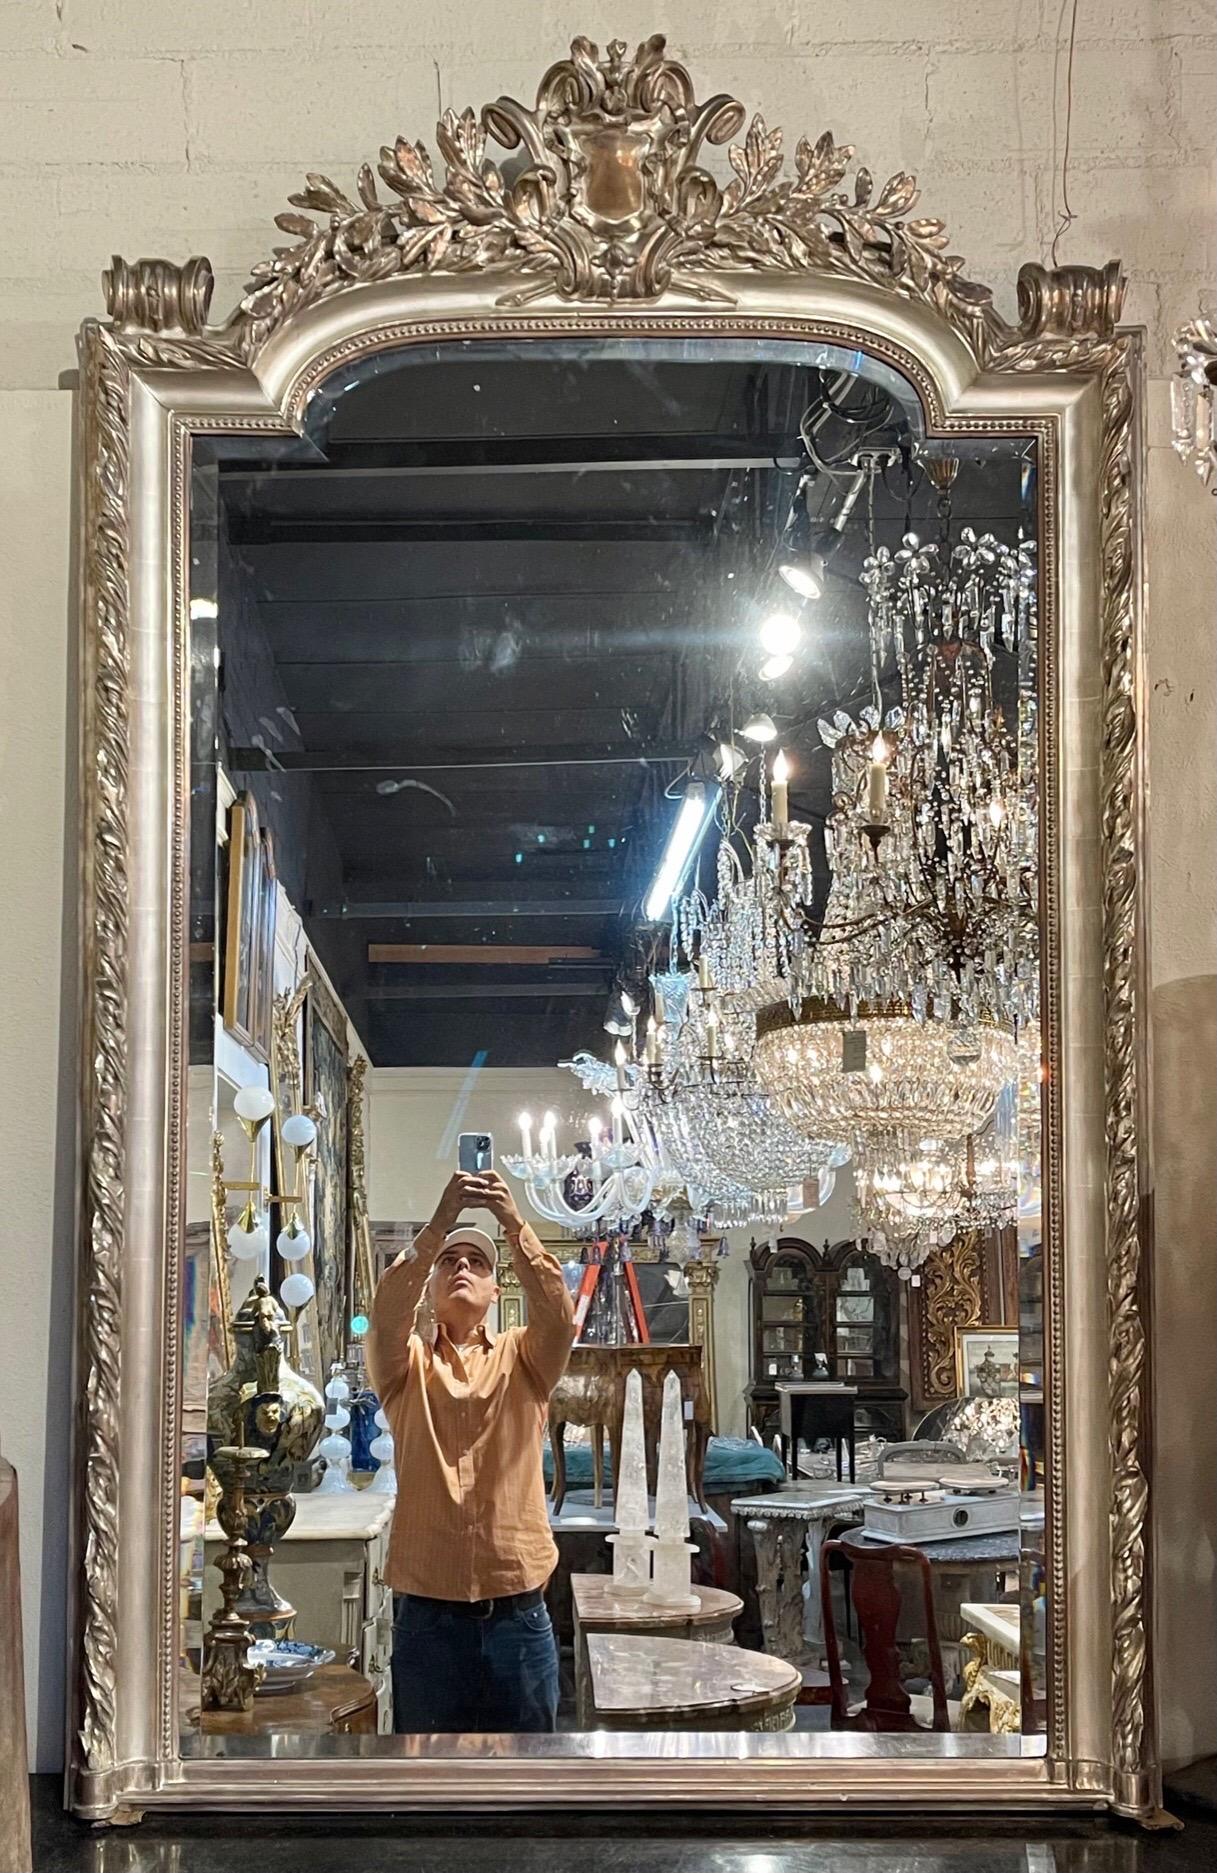 Amazing large scale French Louis XVI style carved and silver leaf mirror with beveled glass. Featuring an elaborately carved crest at the top of the mirror and a fabulous finish. Stunning!